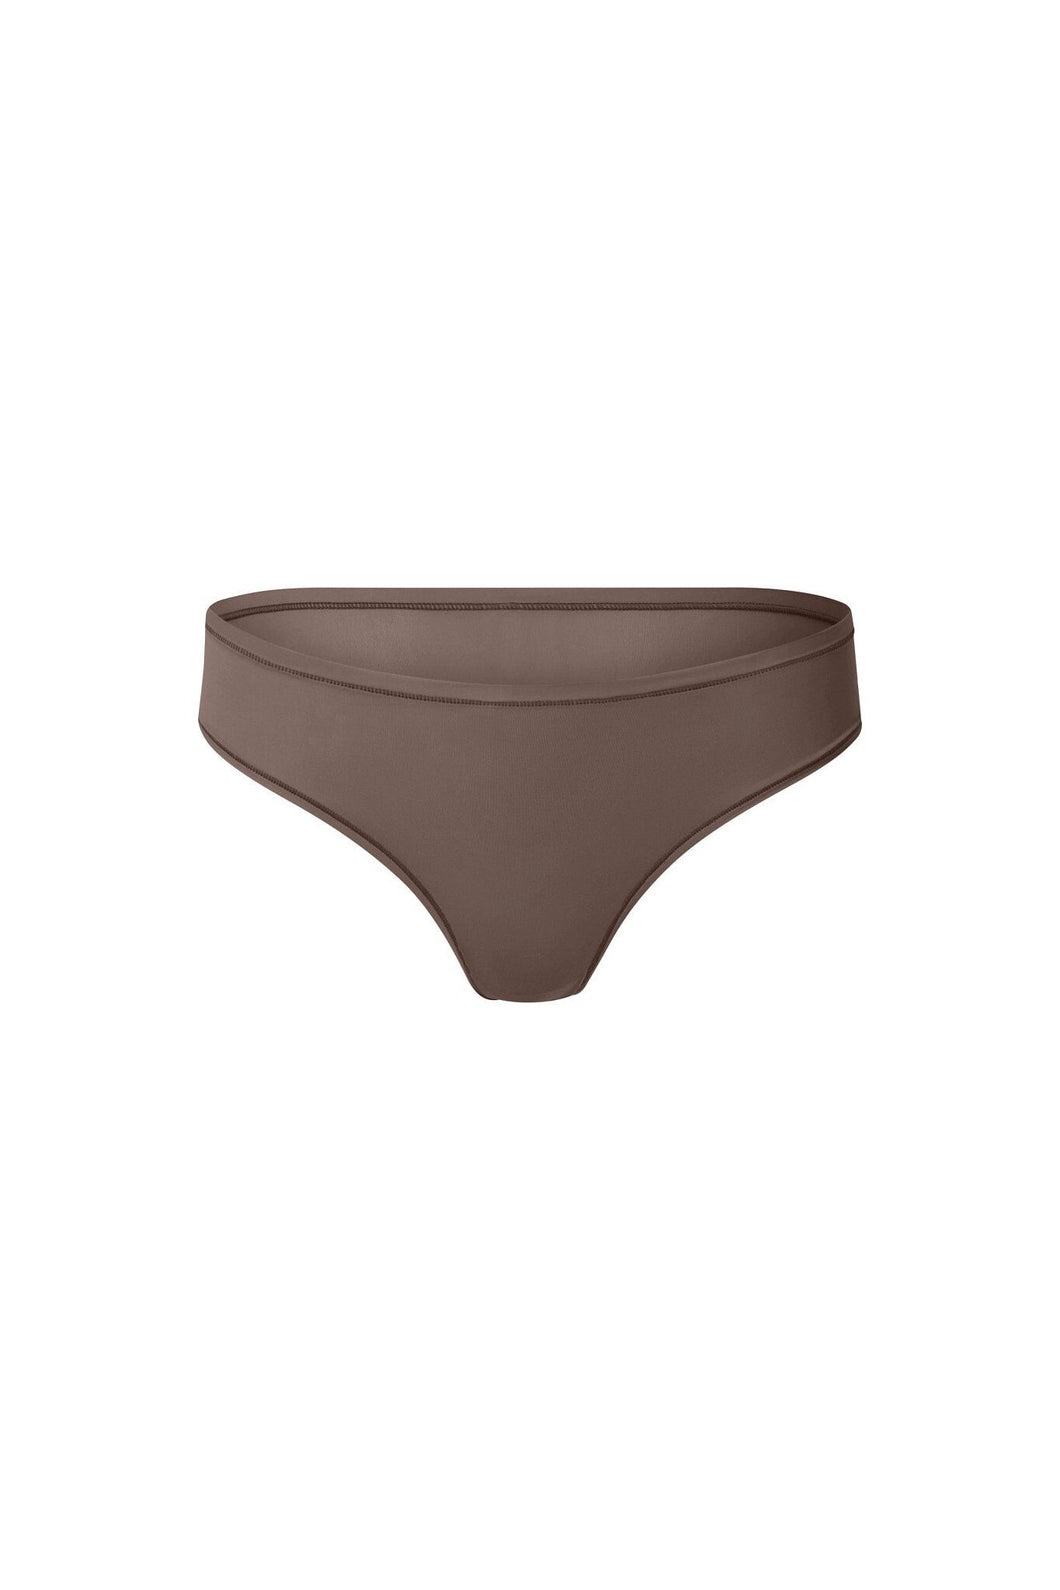 nueskin Mora in color Deep Taupe and shape thong